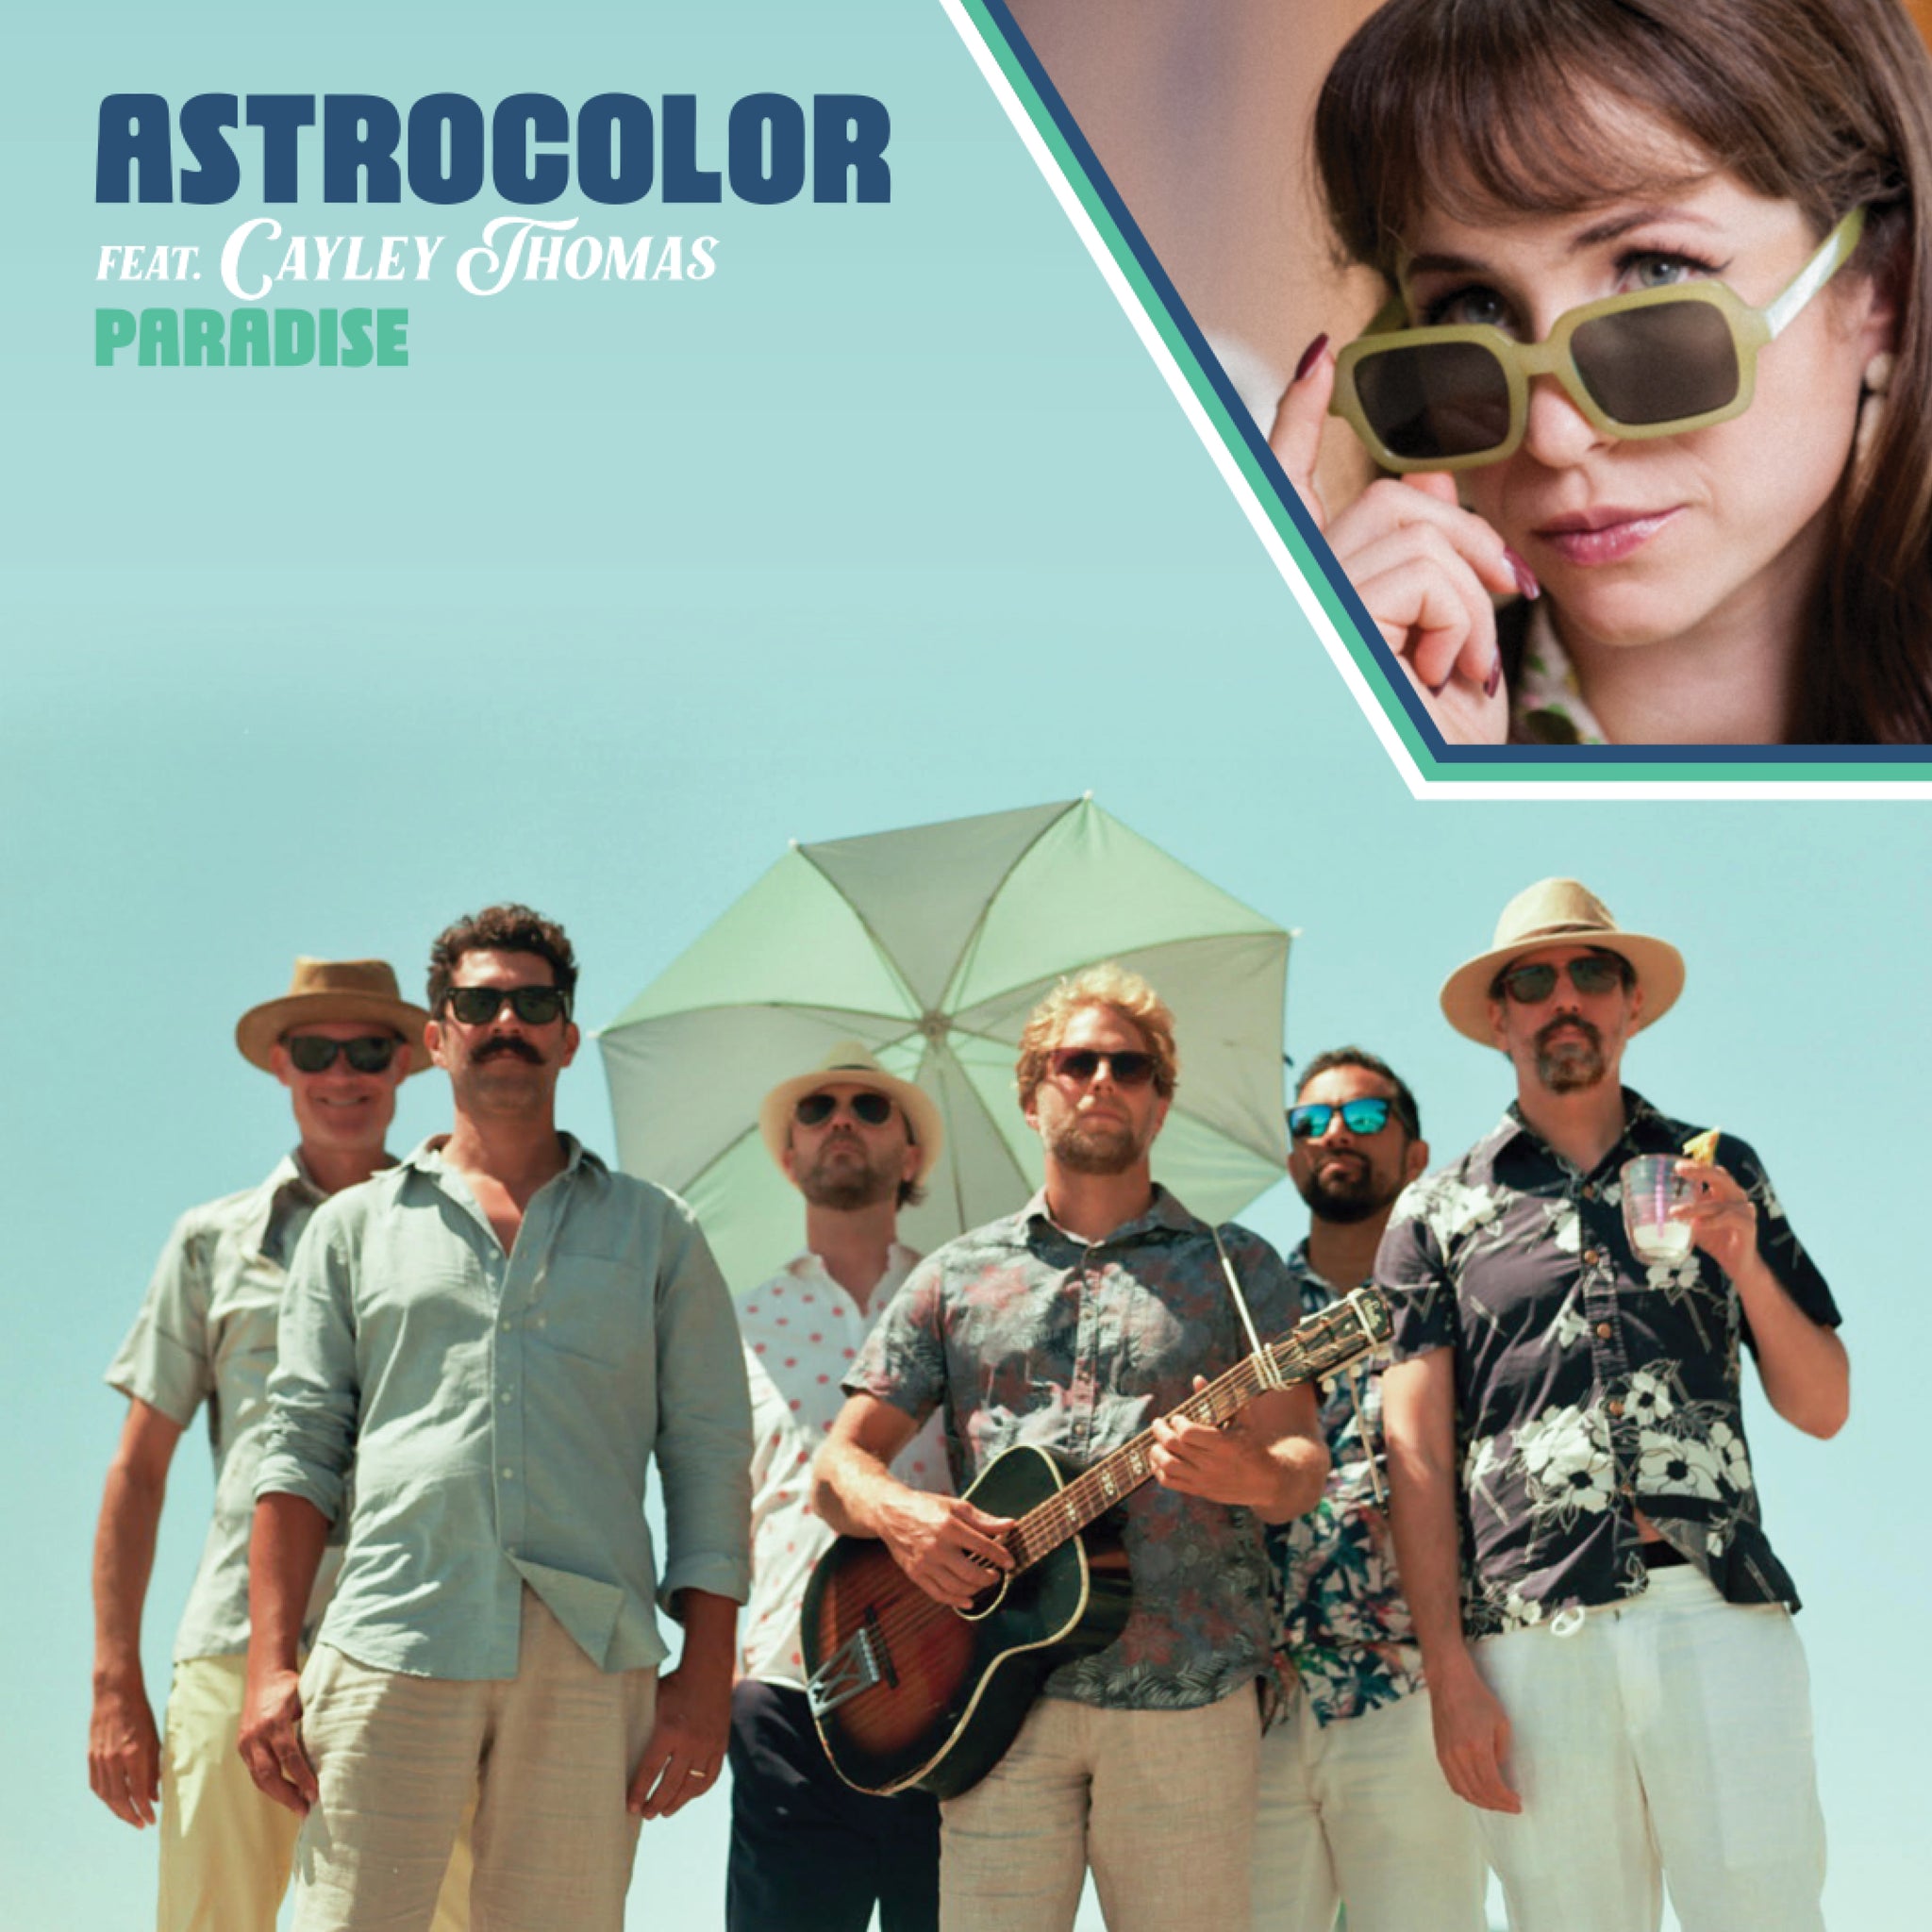 Blundstone playlist artist Astrocolor and Cayley Thomas